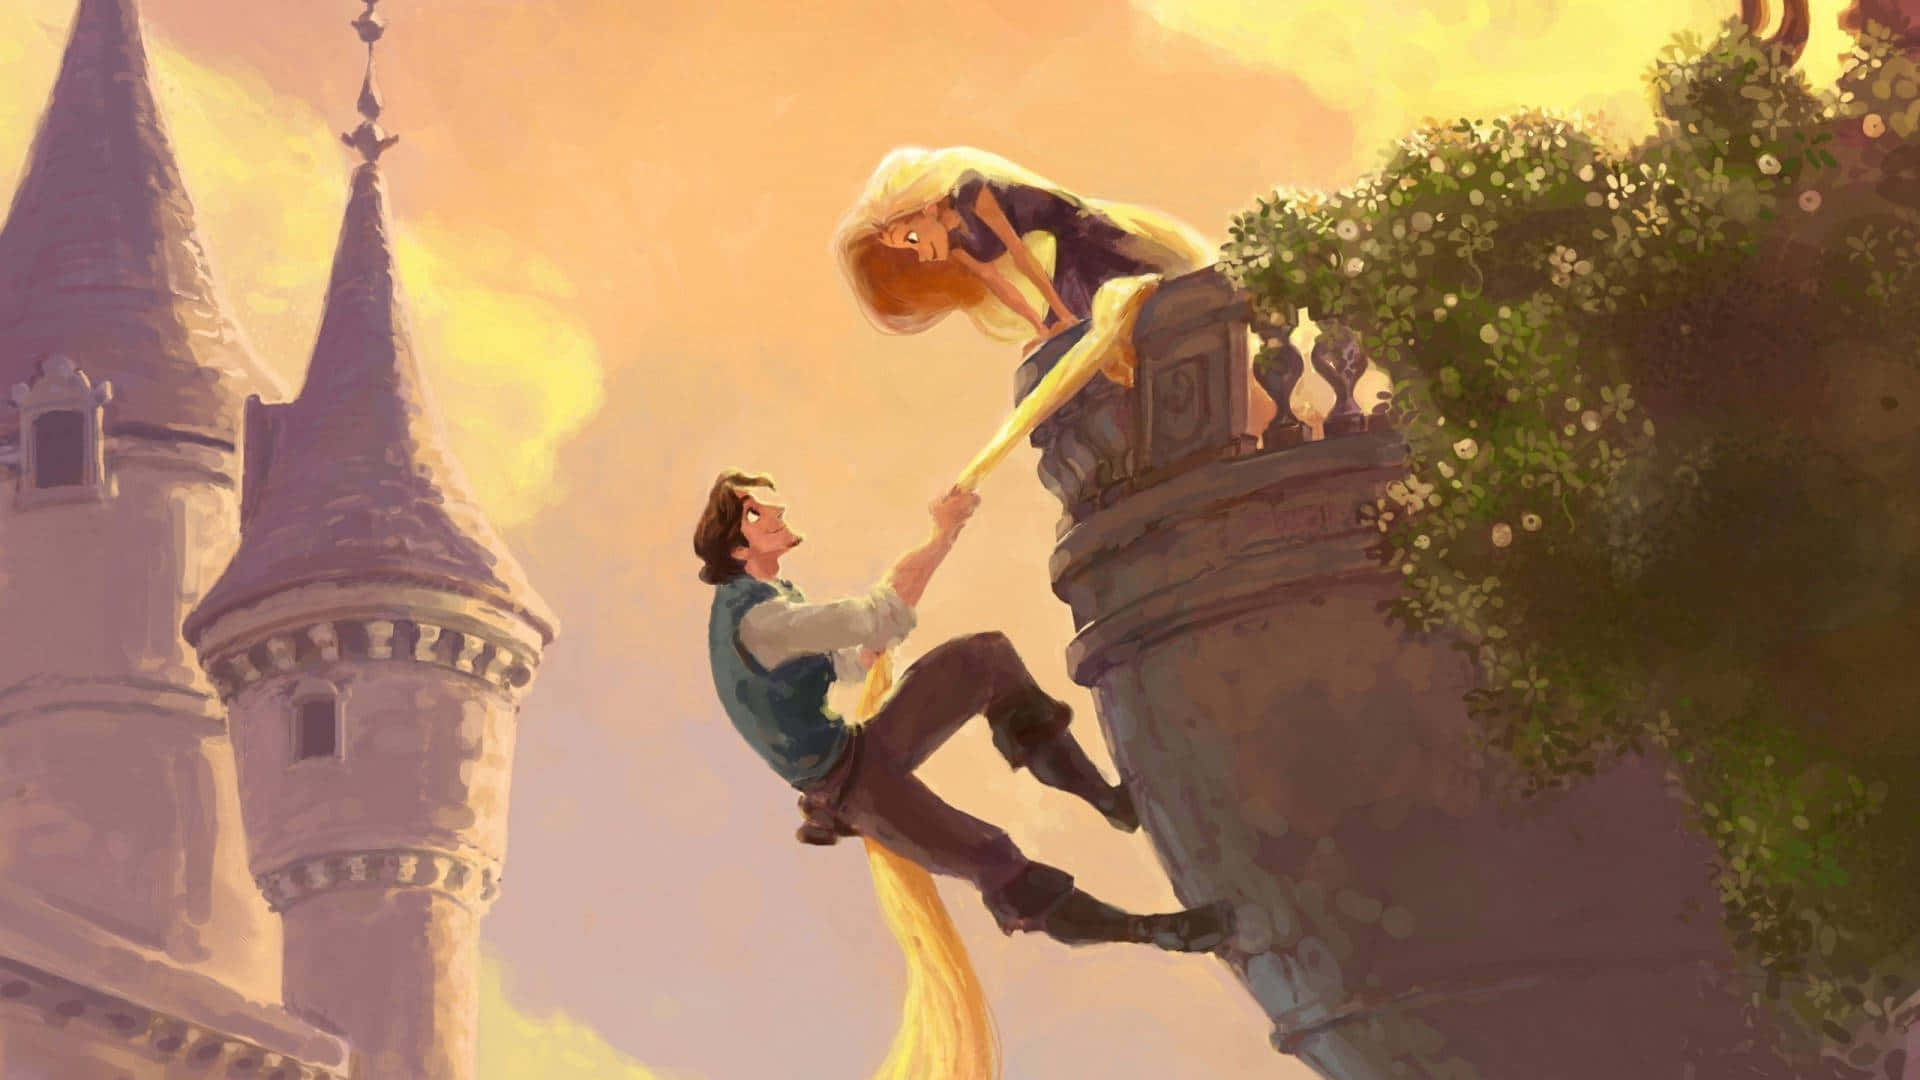 Rapunzel admiring the lantern-filled sky from her tower